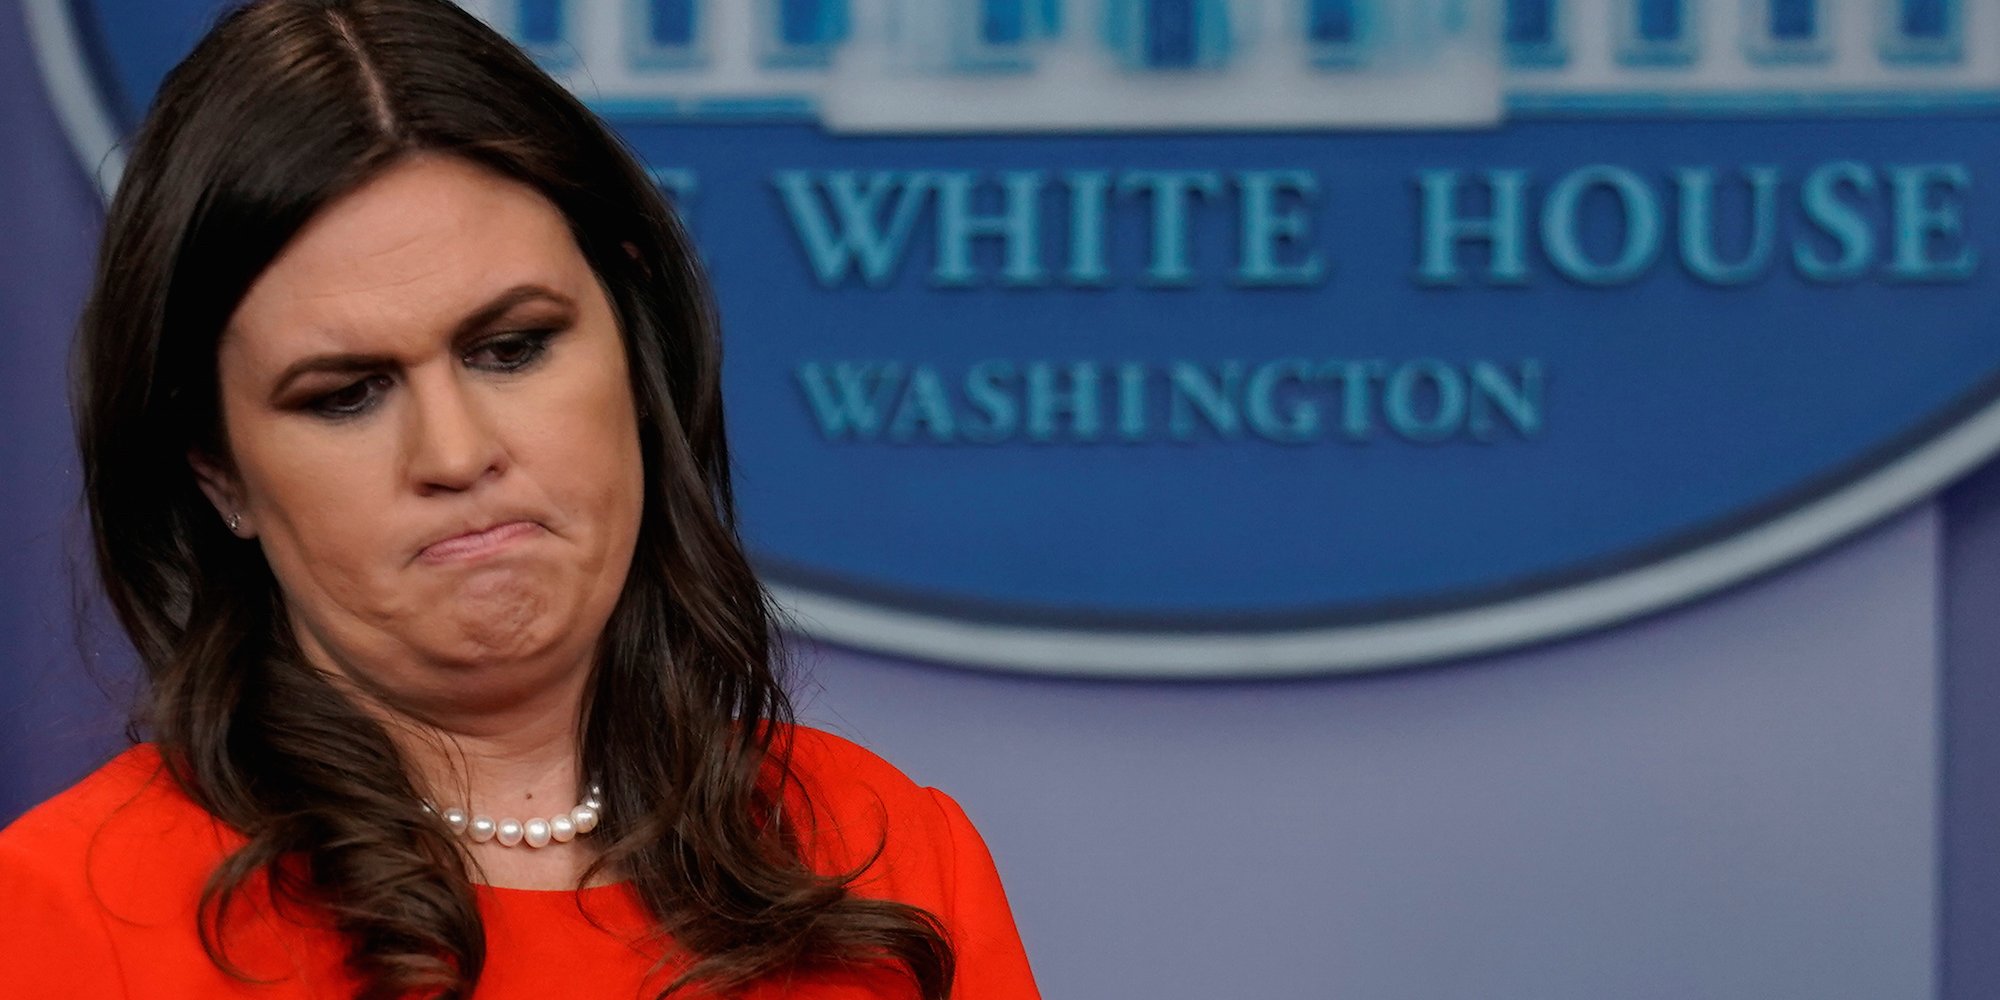 The owner of the Red Hen restaurant in Lexington, Virginia, who booted White House Sarah Huckabee Sanders from her restaurant on Friday granted an interview to the Washington Post on Saturday in which she admitted she does not regret her decision.